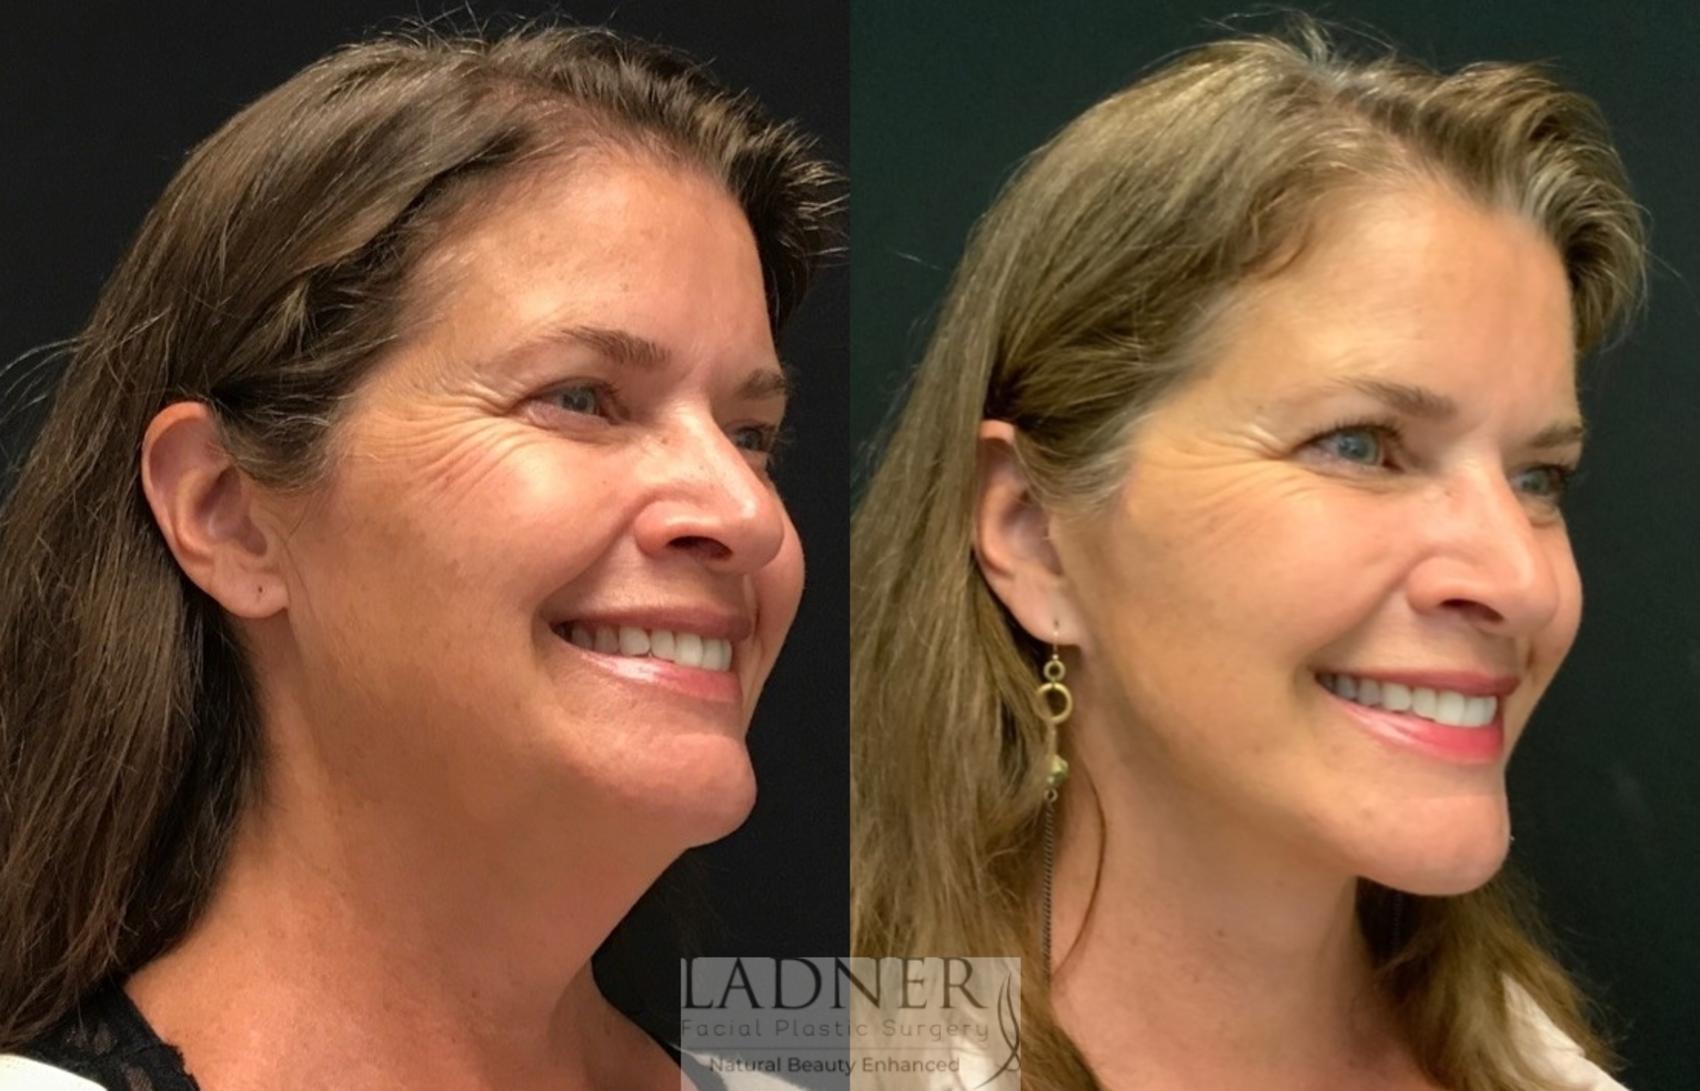 Facelift Neck Lift Before And After Pictures Case 112 Denver Co Ladner Facial Plastic Surgery 